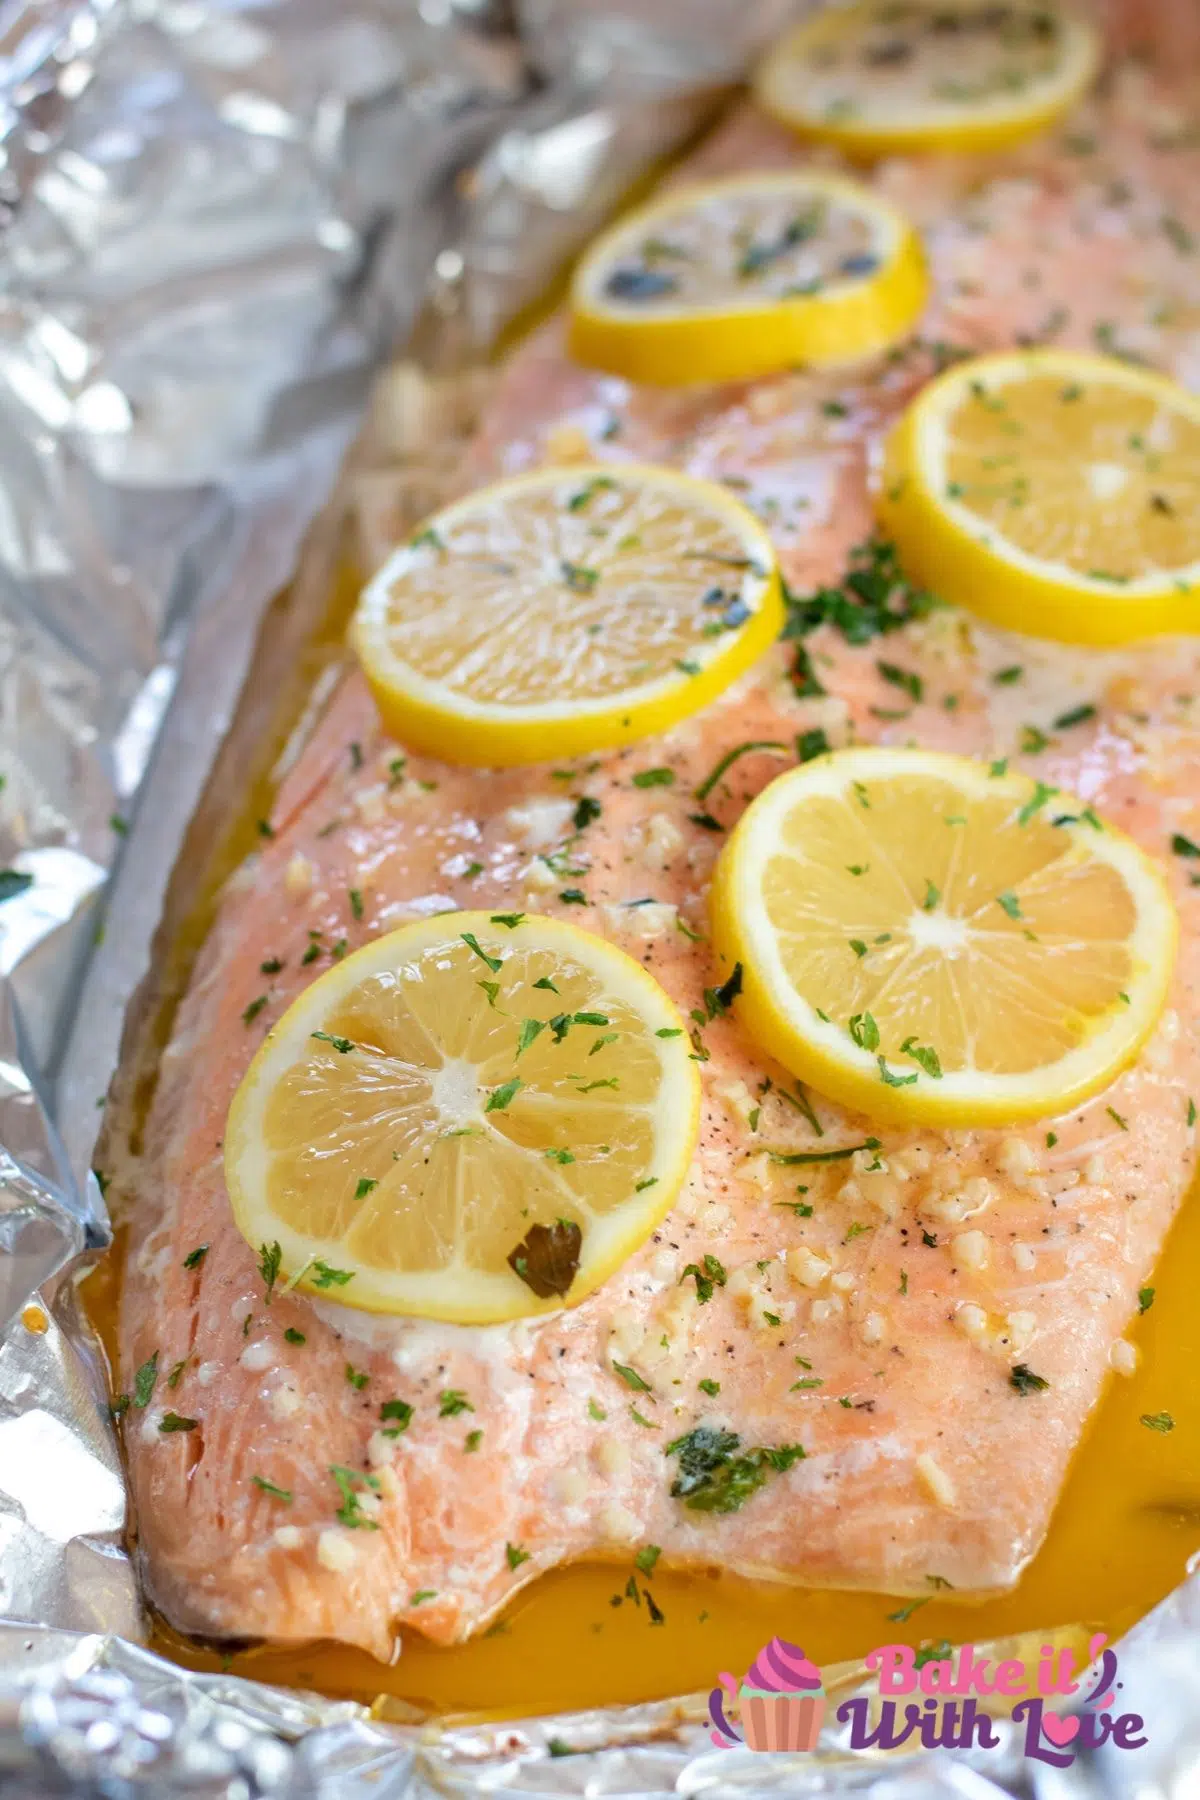 Baked steelhead trout in foil pouch with garlic, butter, and lemon sauce.